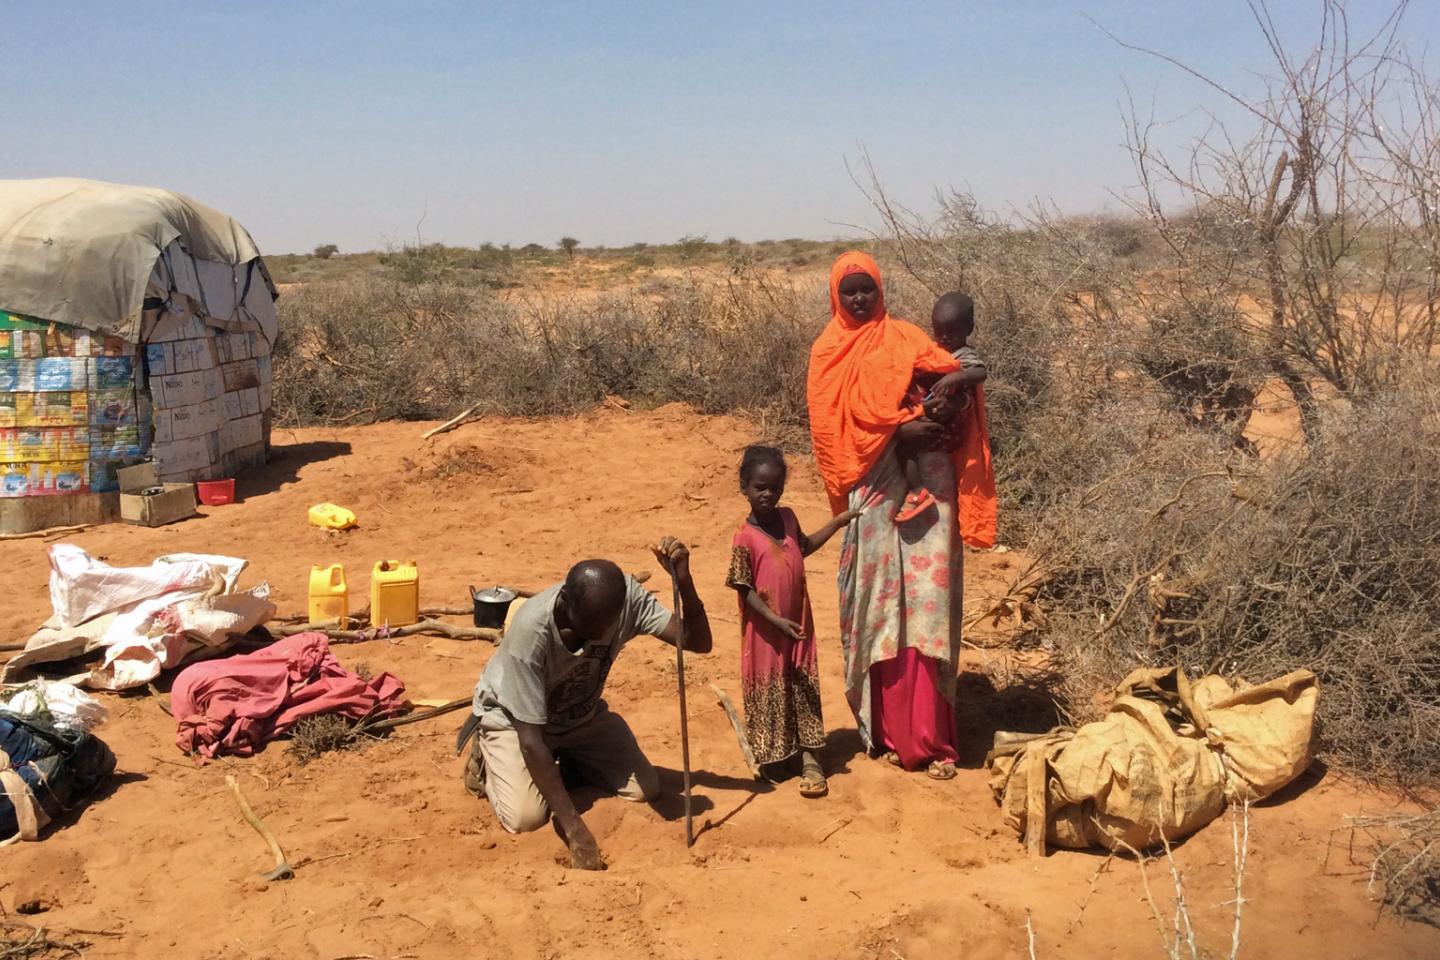 Drought forces families to flee their homes to find shelter in camps for the internally displaced